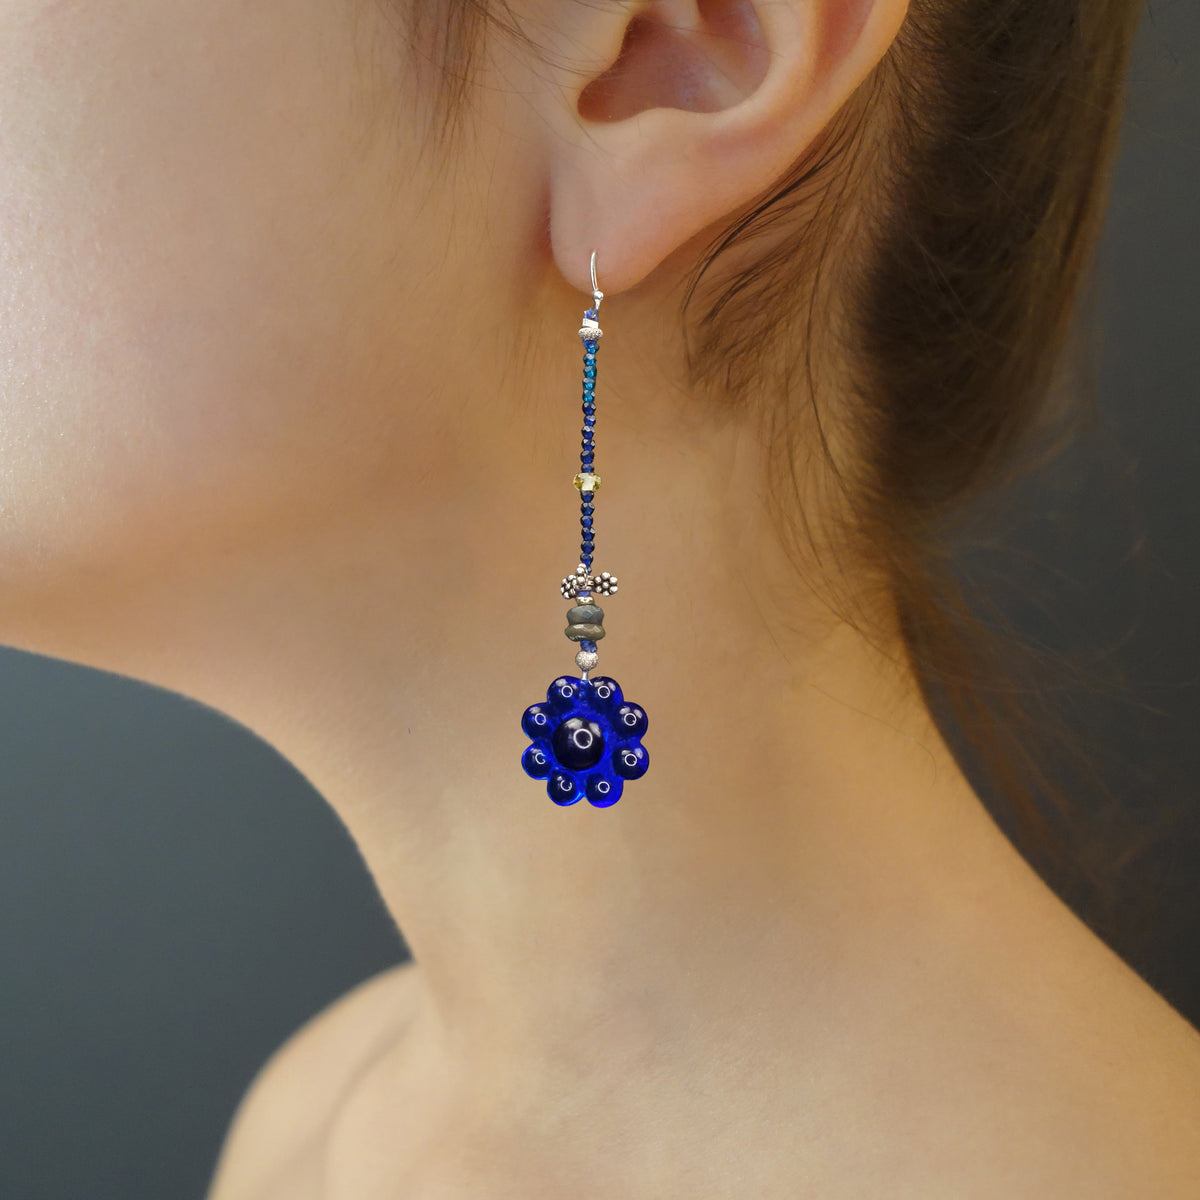 Queen of the Blues: black opal, apatite, and German glass ear